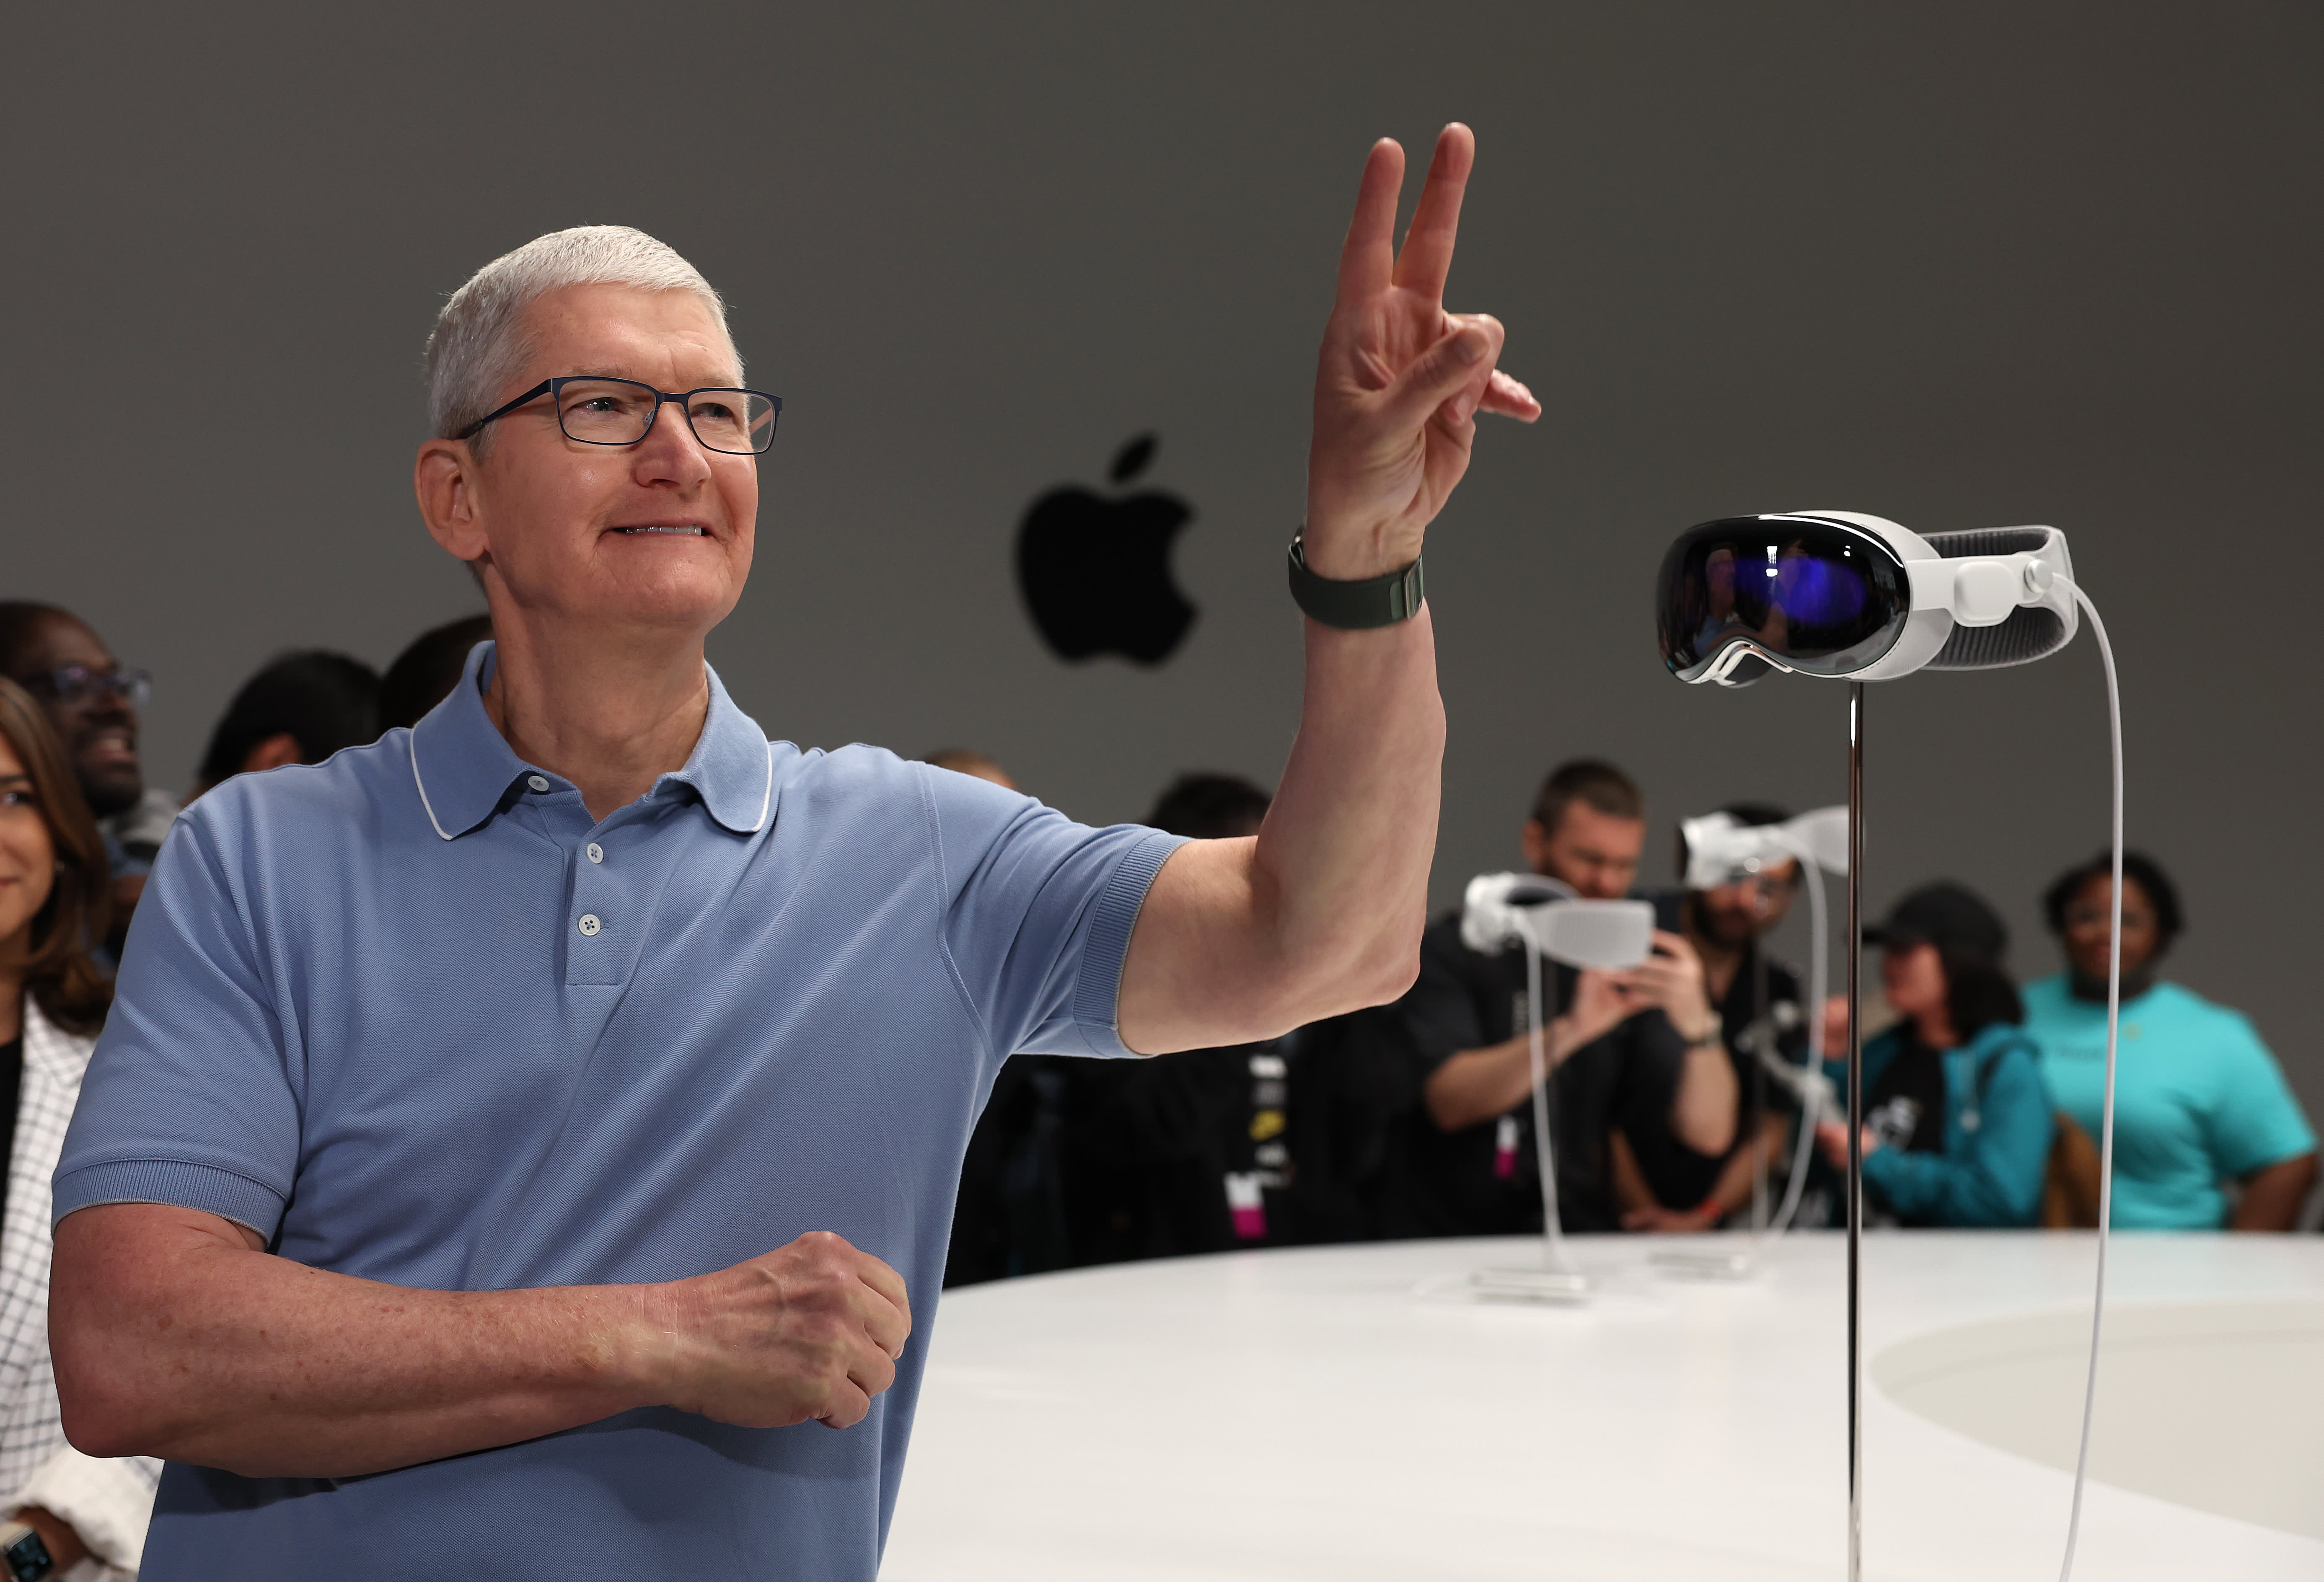 3 things for investors to consider after Apple's big unveiling of a new headset